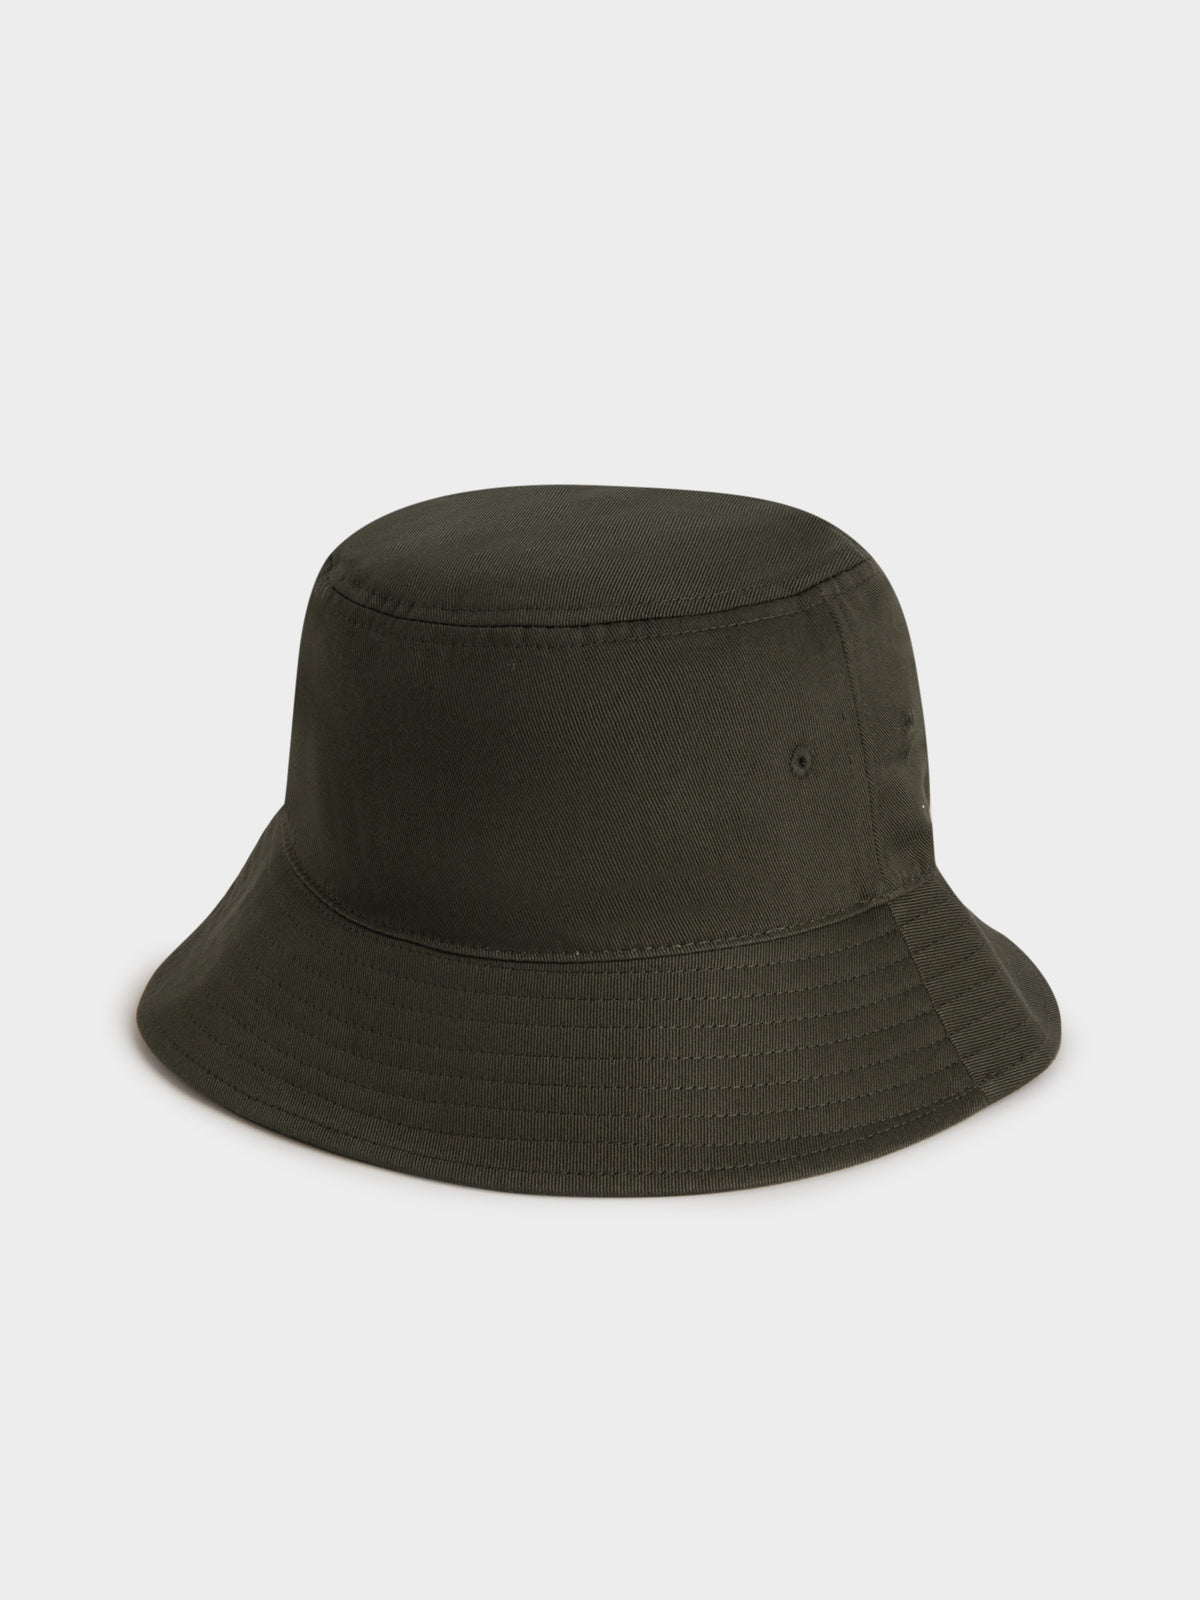 Flag Embroidered Cotton Bucket Hat in Olive